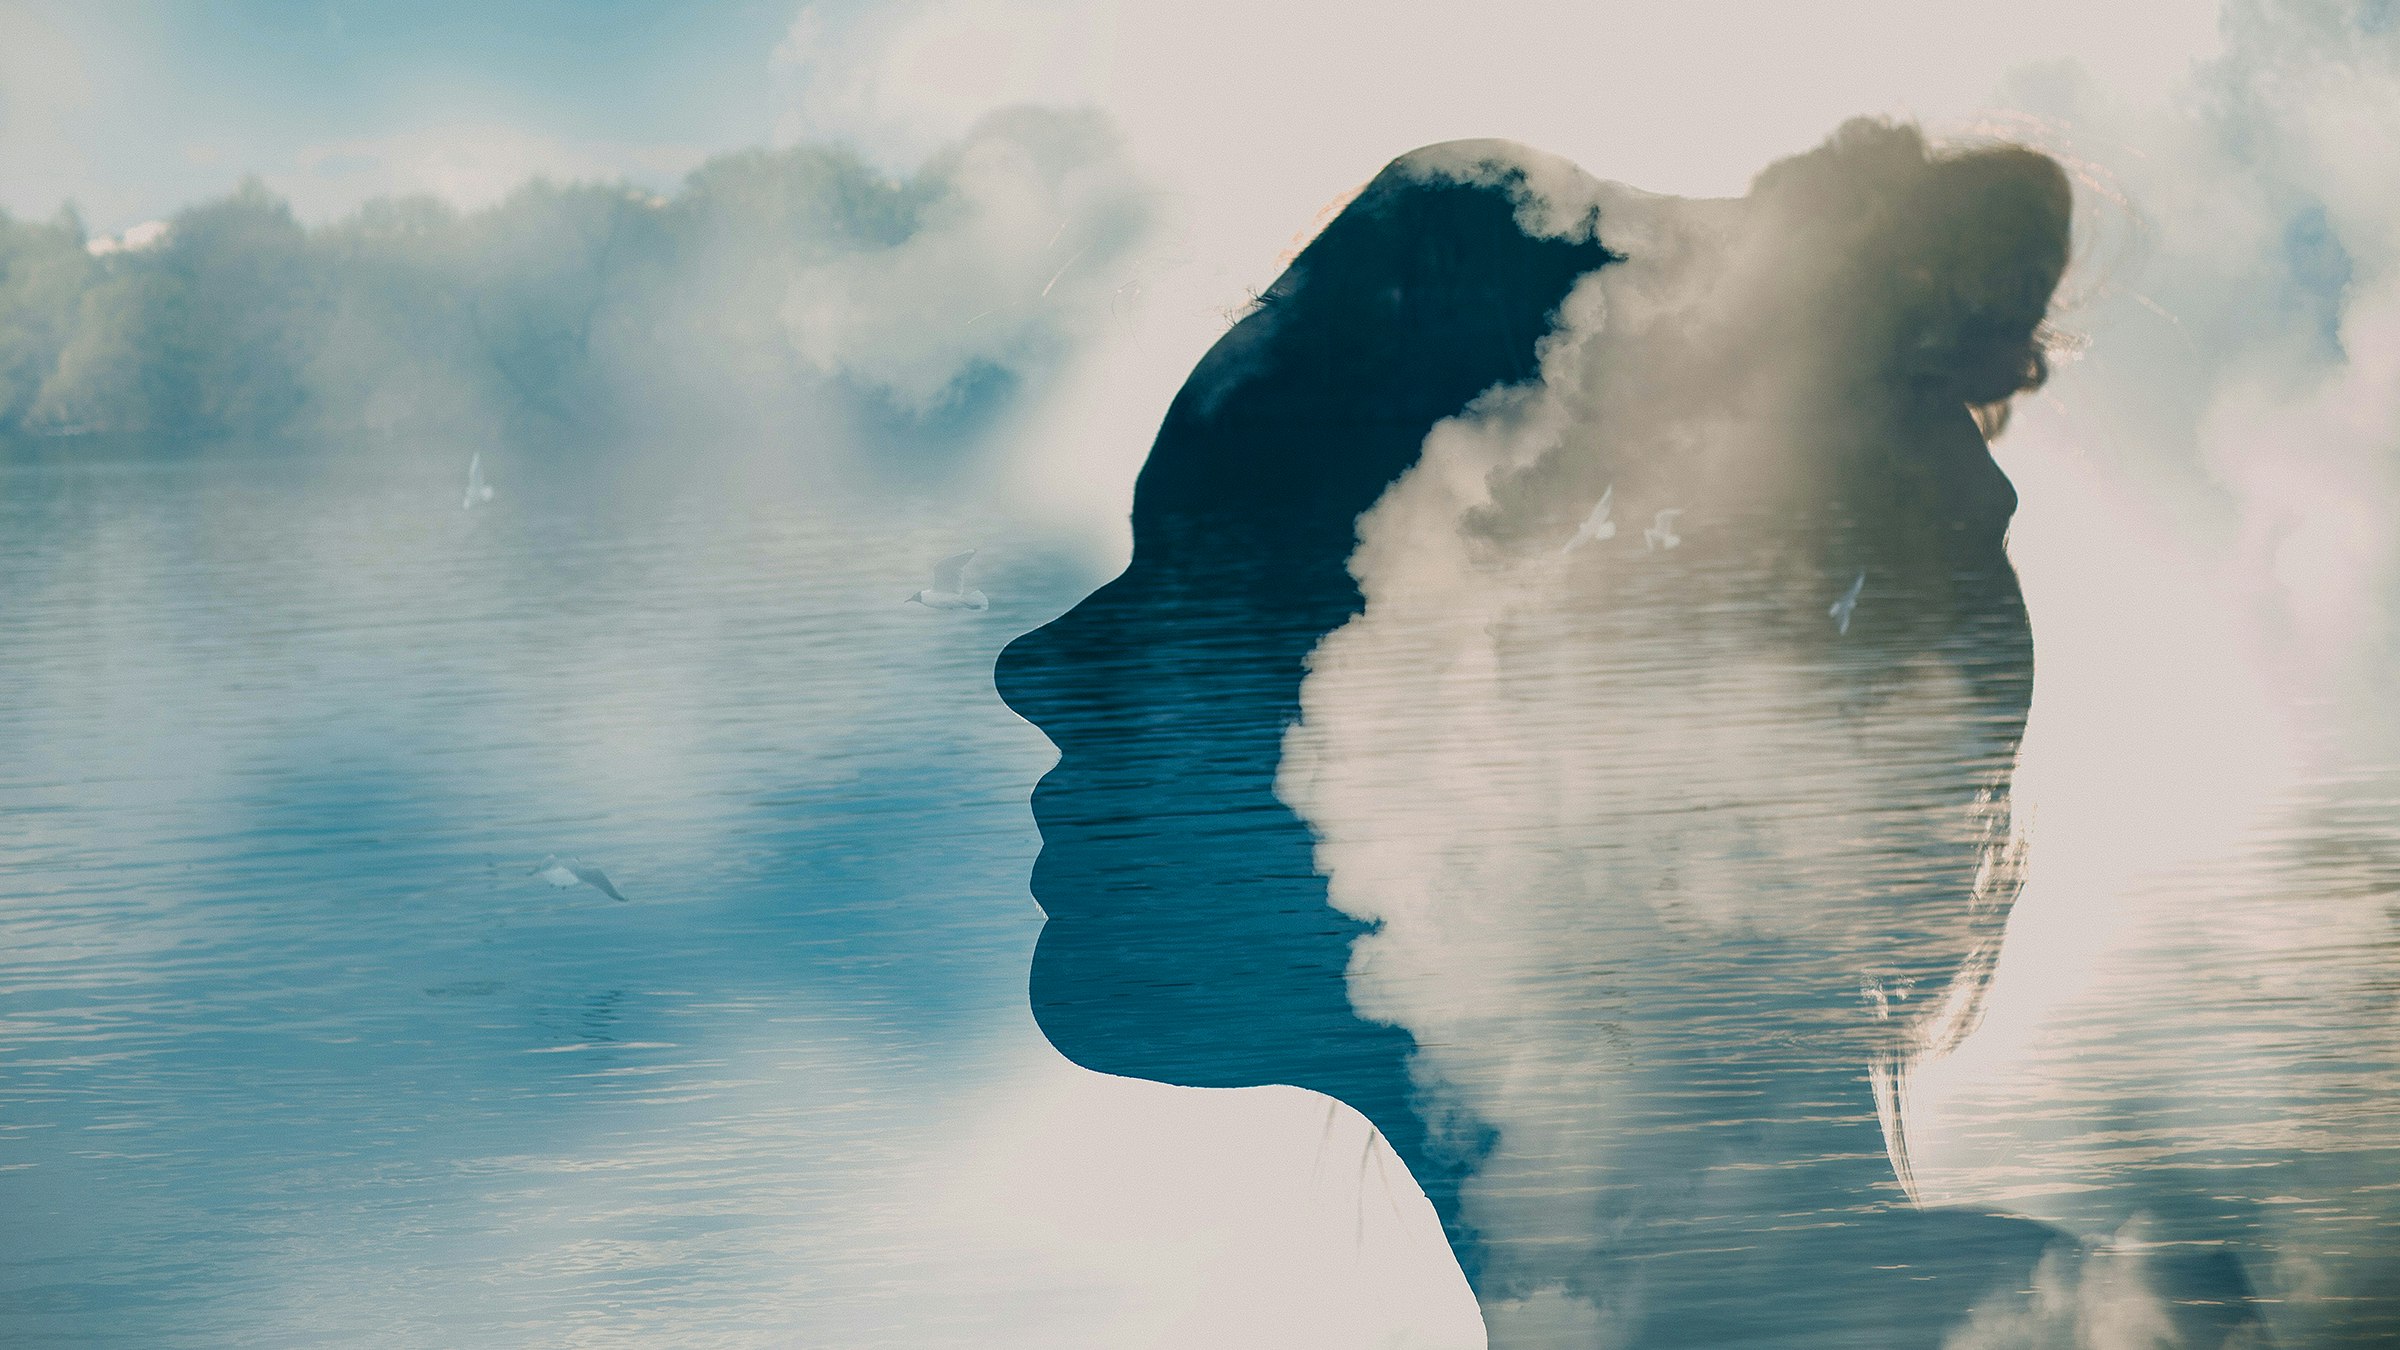 A woman in profile, her head partly obscured by clouds and a serene lake scene in the background.